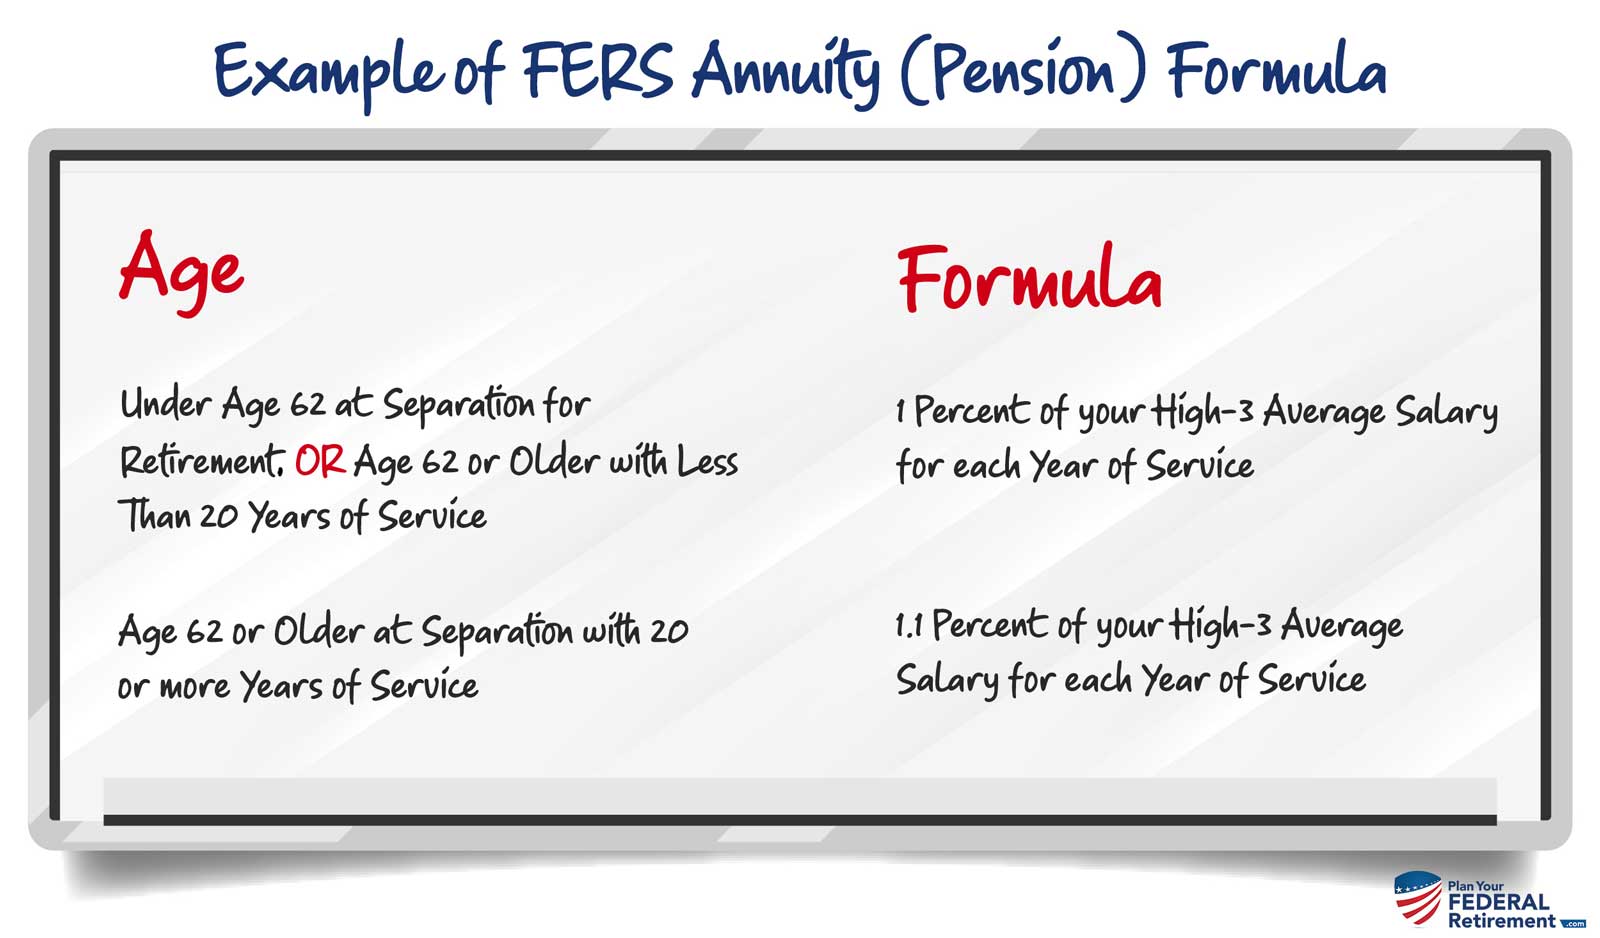 Calculating your FERS Annuity